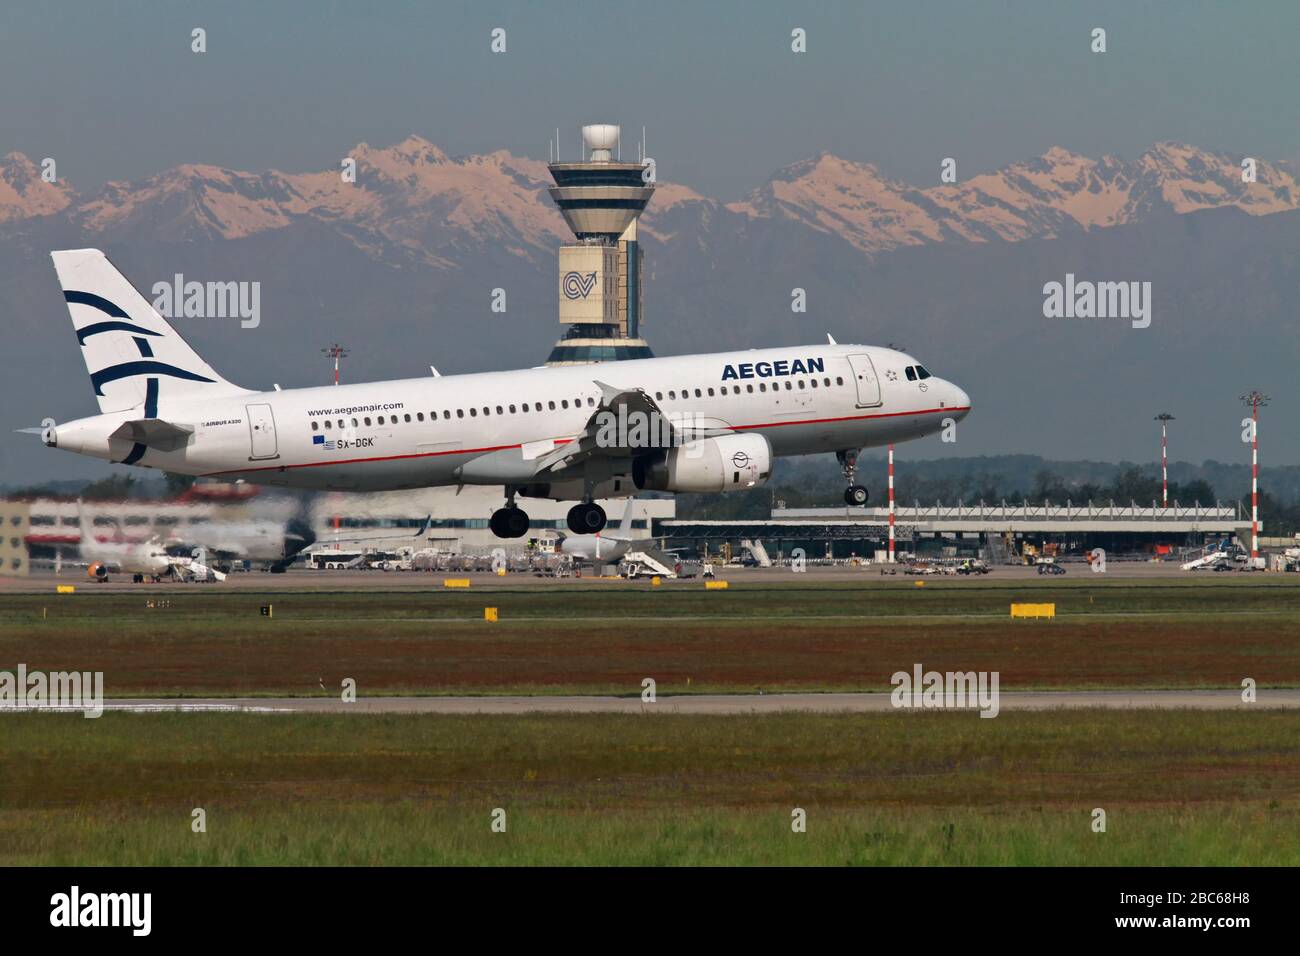 Aegean Airlines Airbus A320-232 SX-DGK comming into land at Malpensa (MXP / LIMC), Milan, Italy Stock Photo